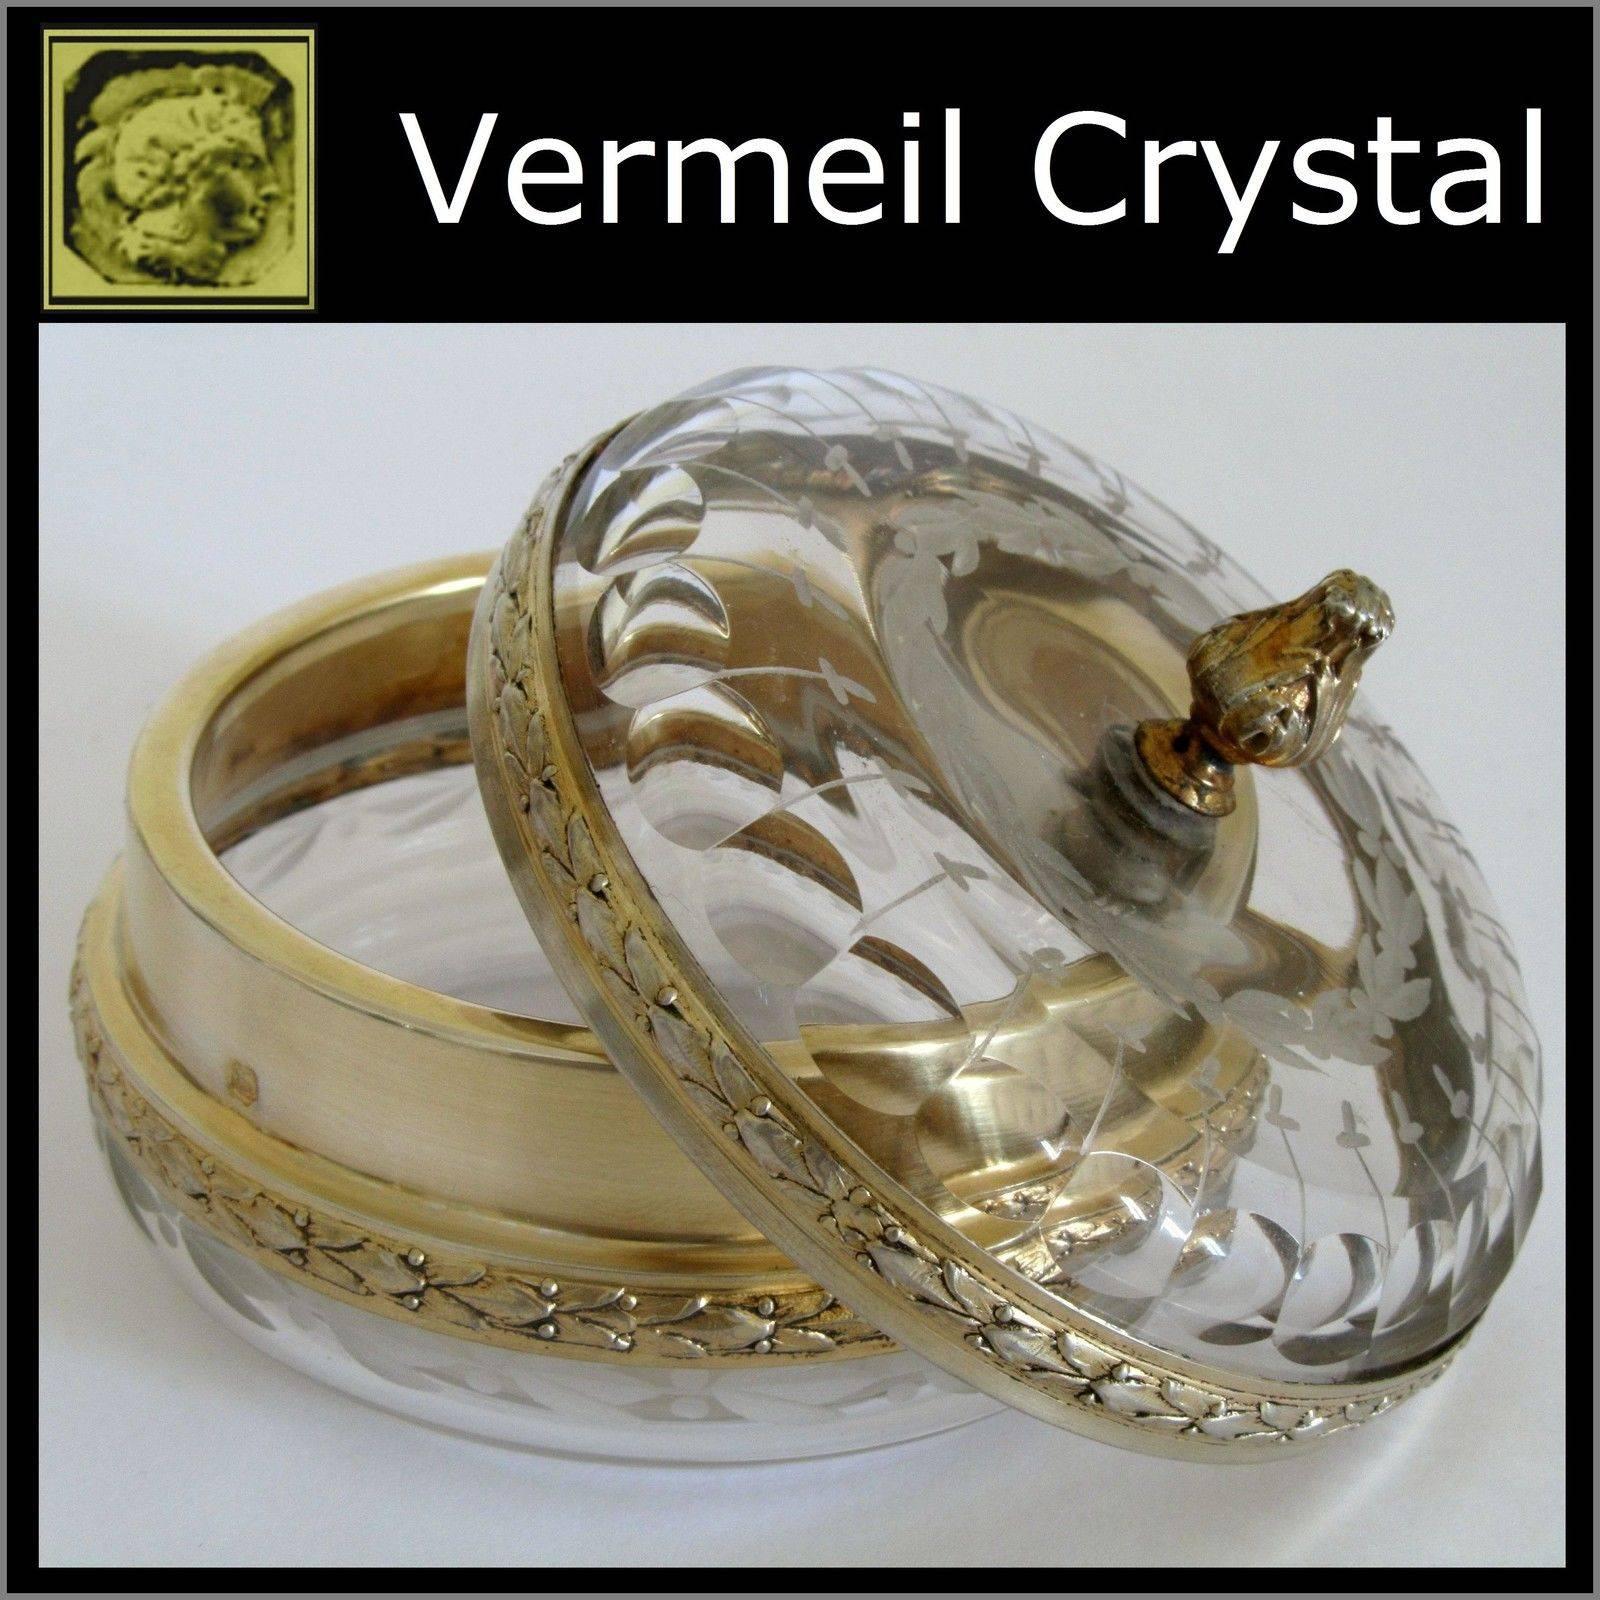 Head of Minerve 1 st titre for 950/1000 French Sterling Silver Vermeil guarantee. The quality of the gold used to recover sterling silver is a minimum of 750 mils (18-karat).

A rare French Sterling Silver 18k Gold & Engraved Crystal